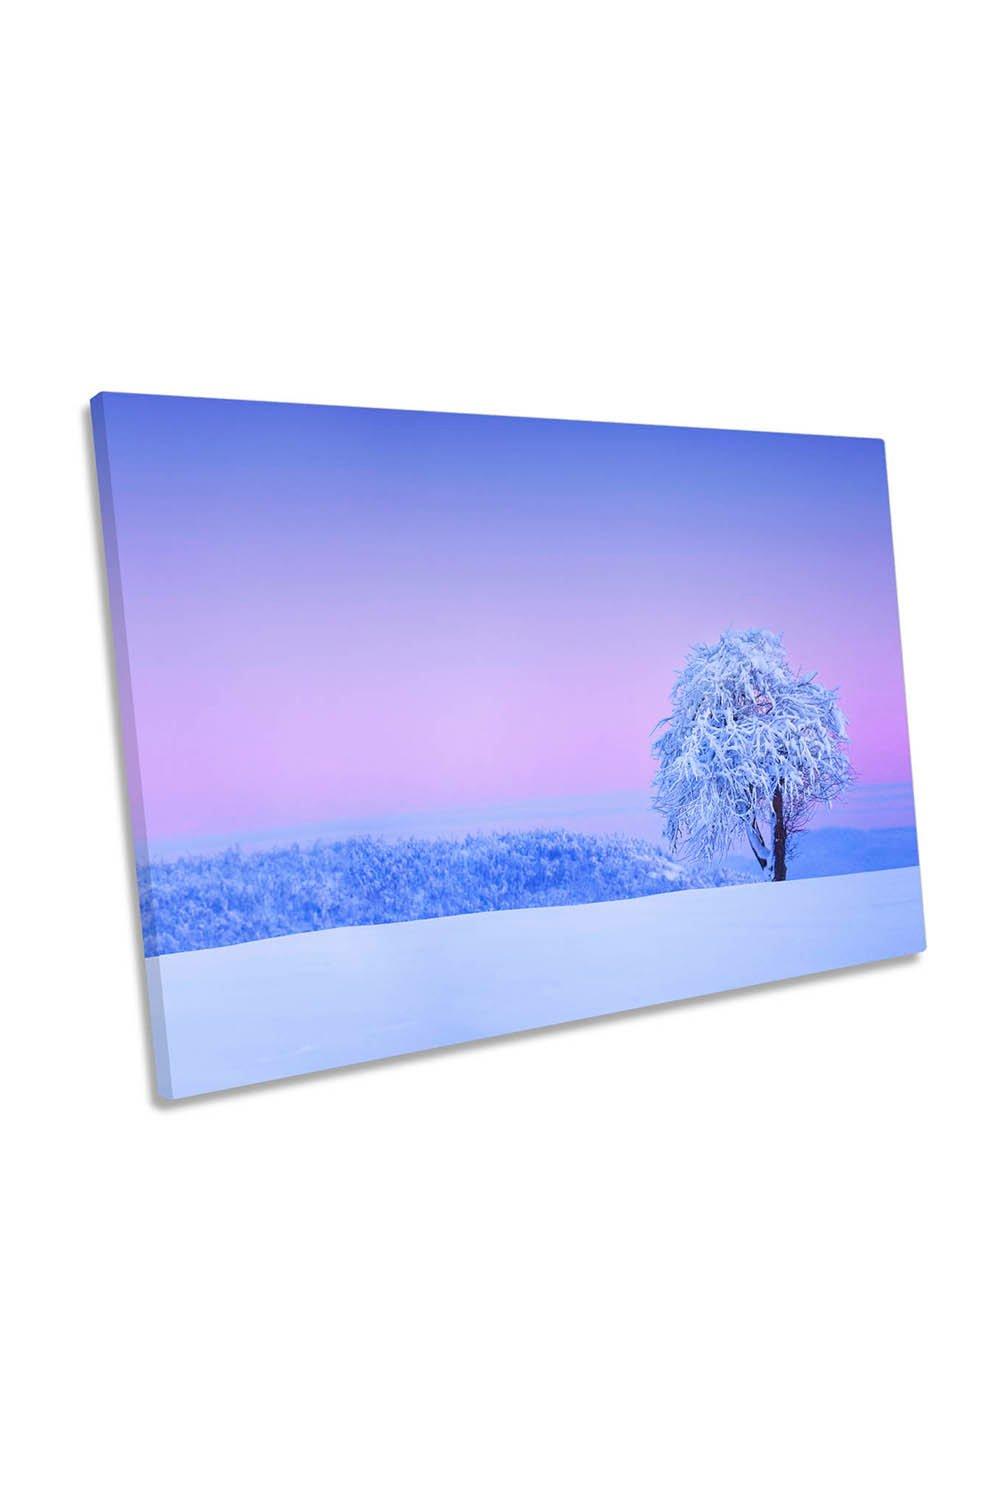 Winter Tree Snow Landscape Pink Sunset Canvas Wall Art Picture Print